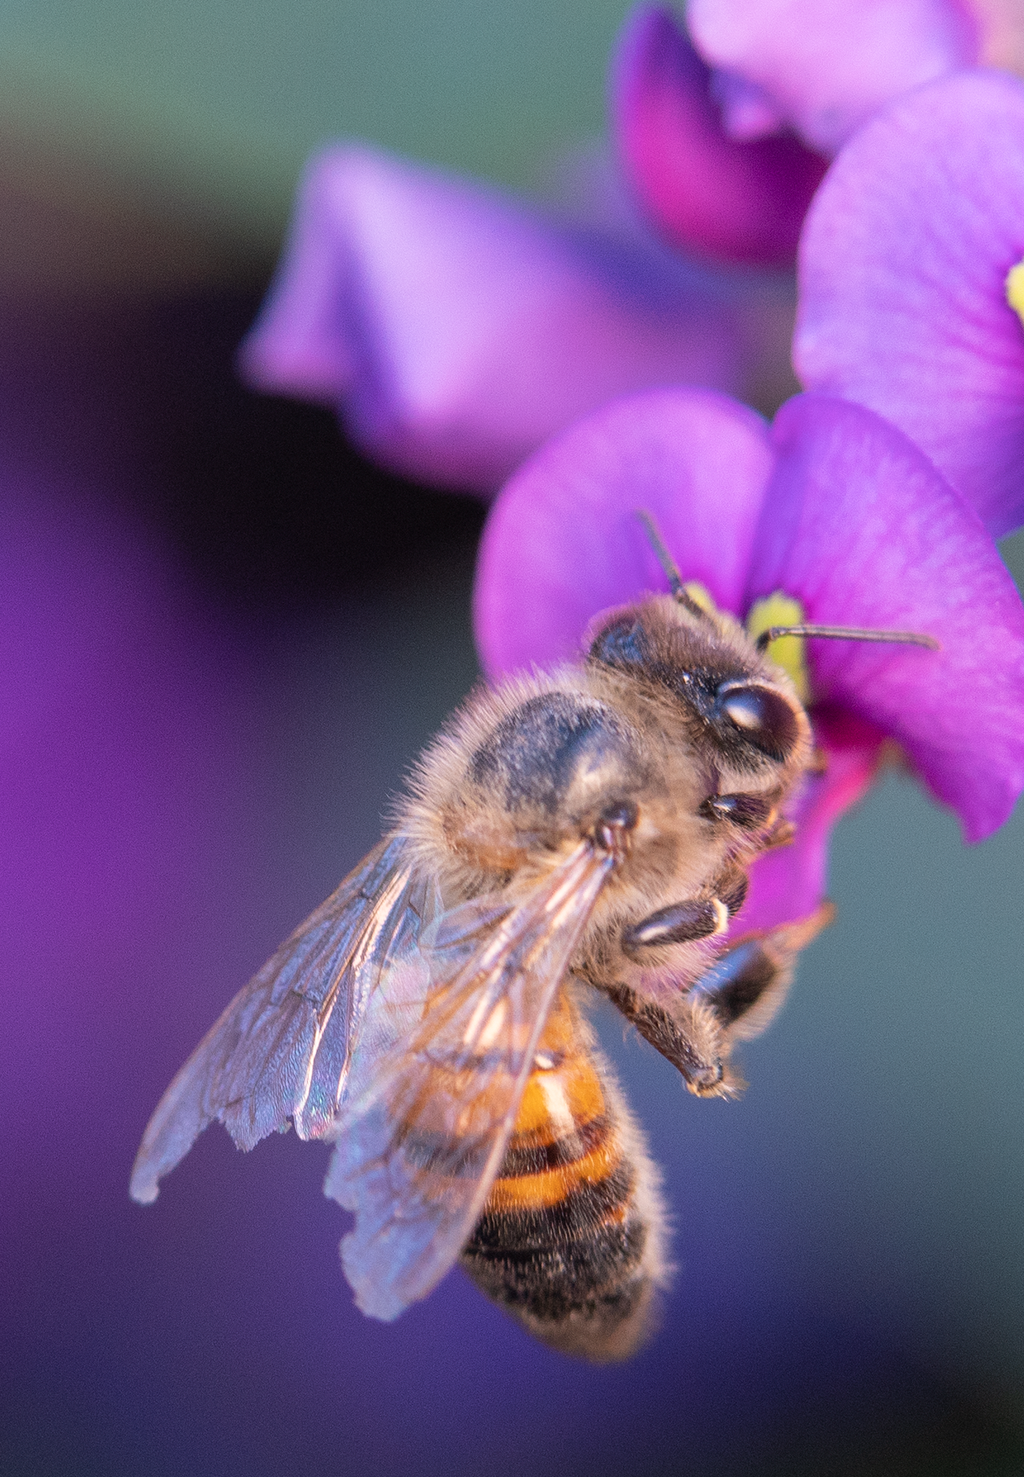 Cover Photo American Bee Journal March 2022: Honey Bee, Purple Lilac Vine